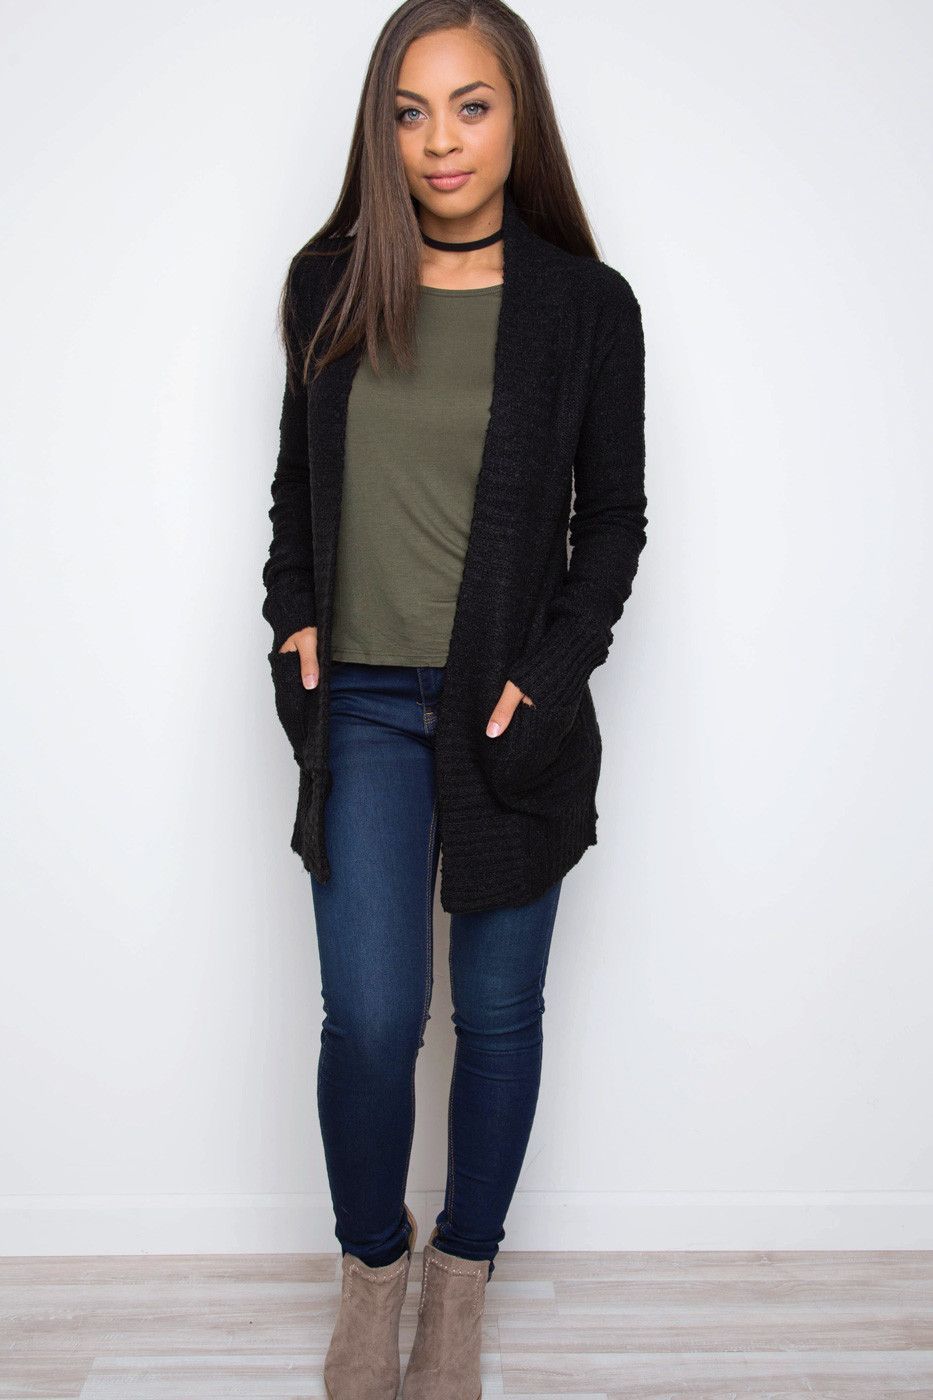 How To Style Black Cardigan Sweater